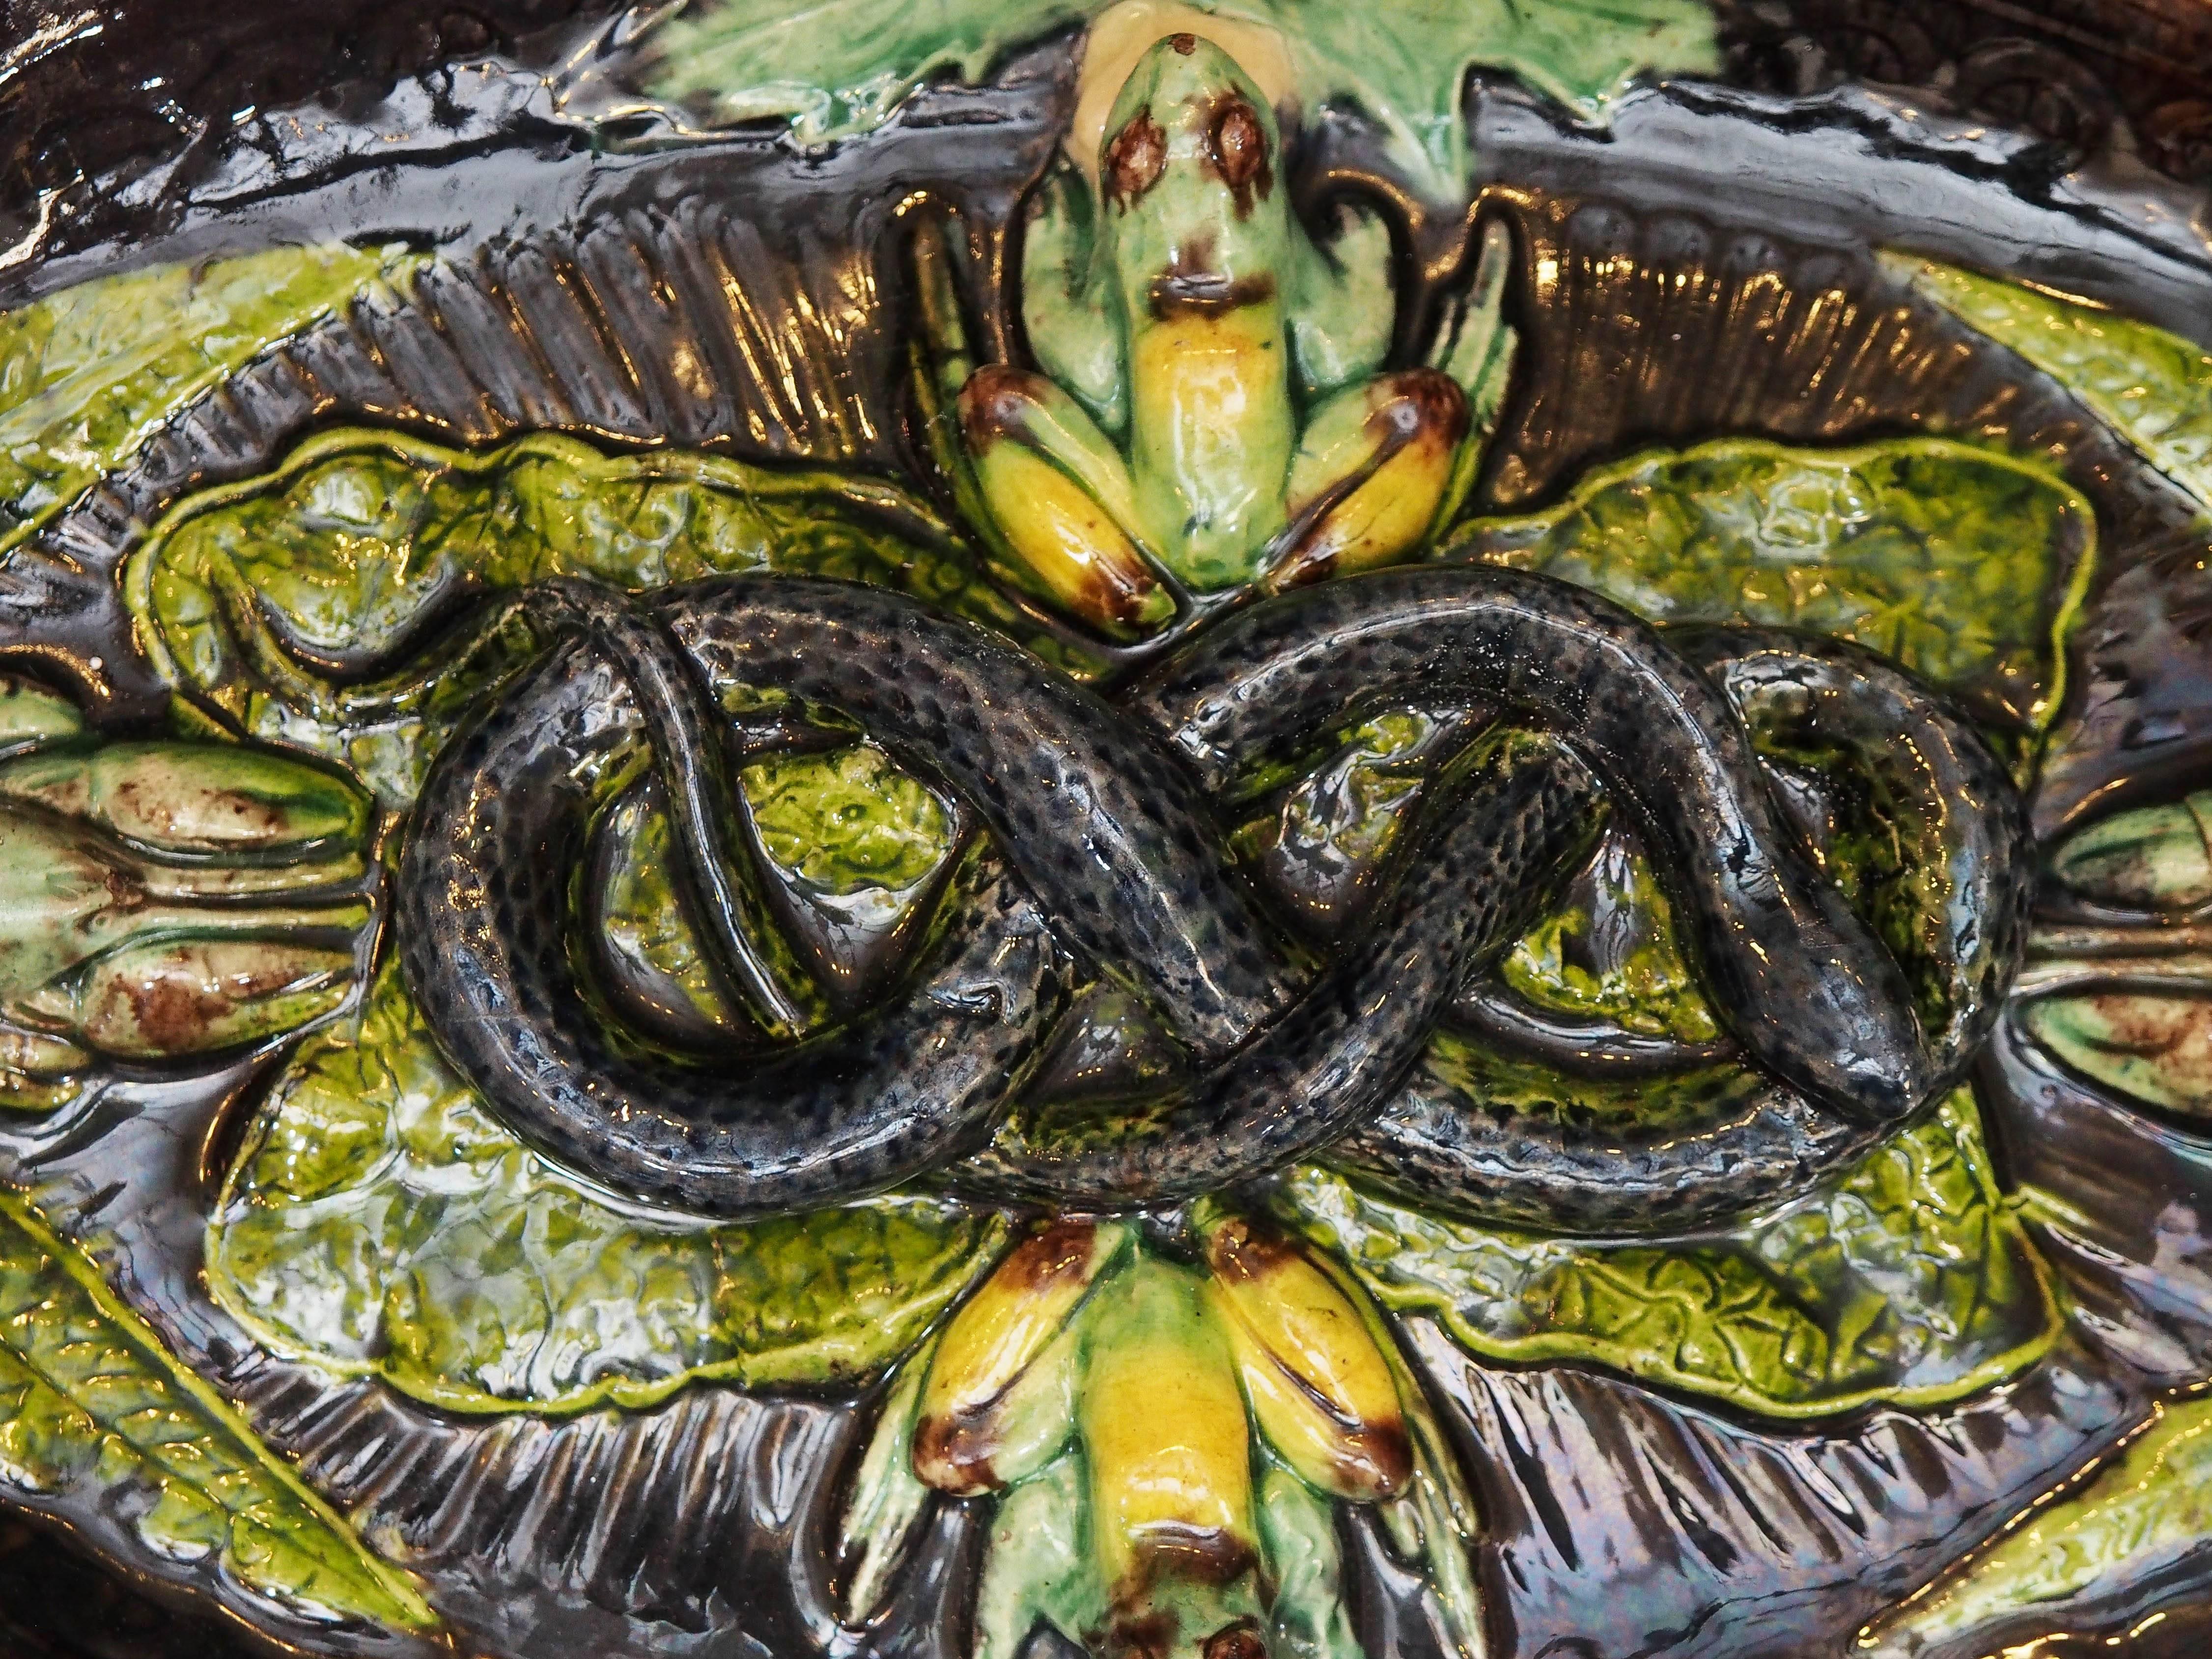 Portuguese Palissy style platter with snakes, snails and other 